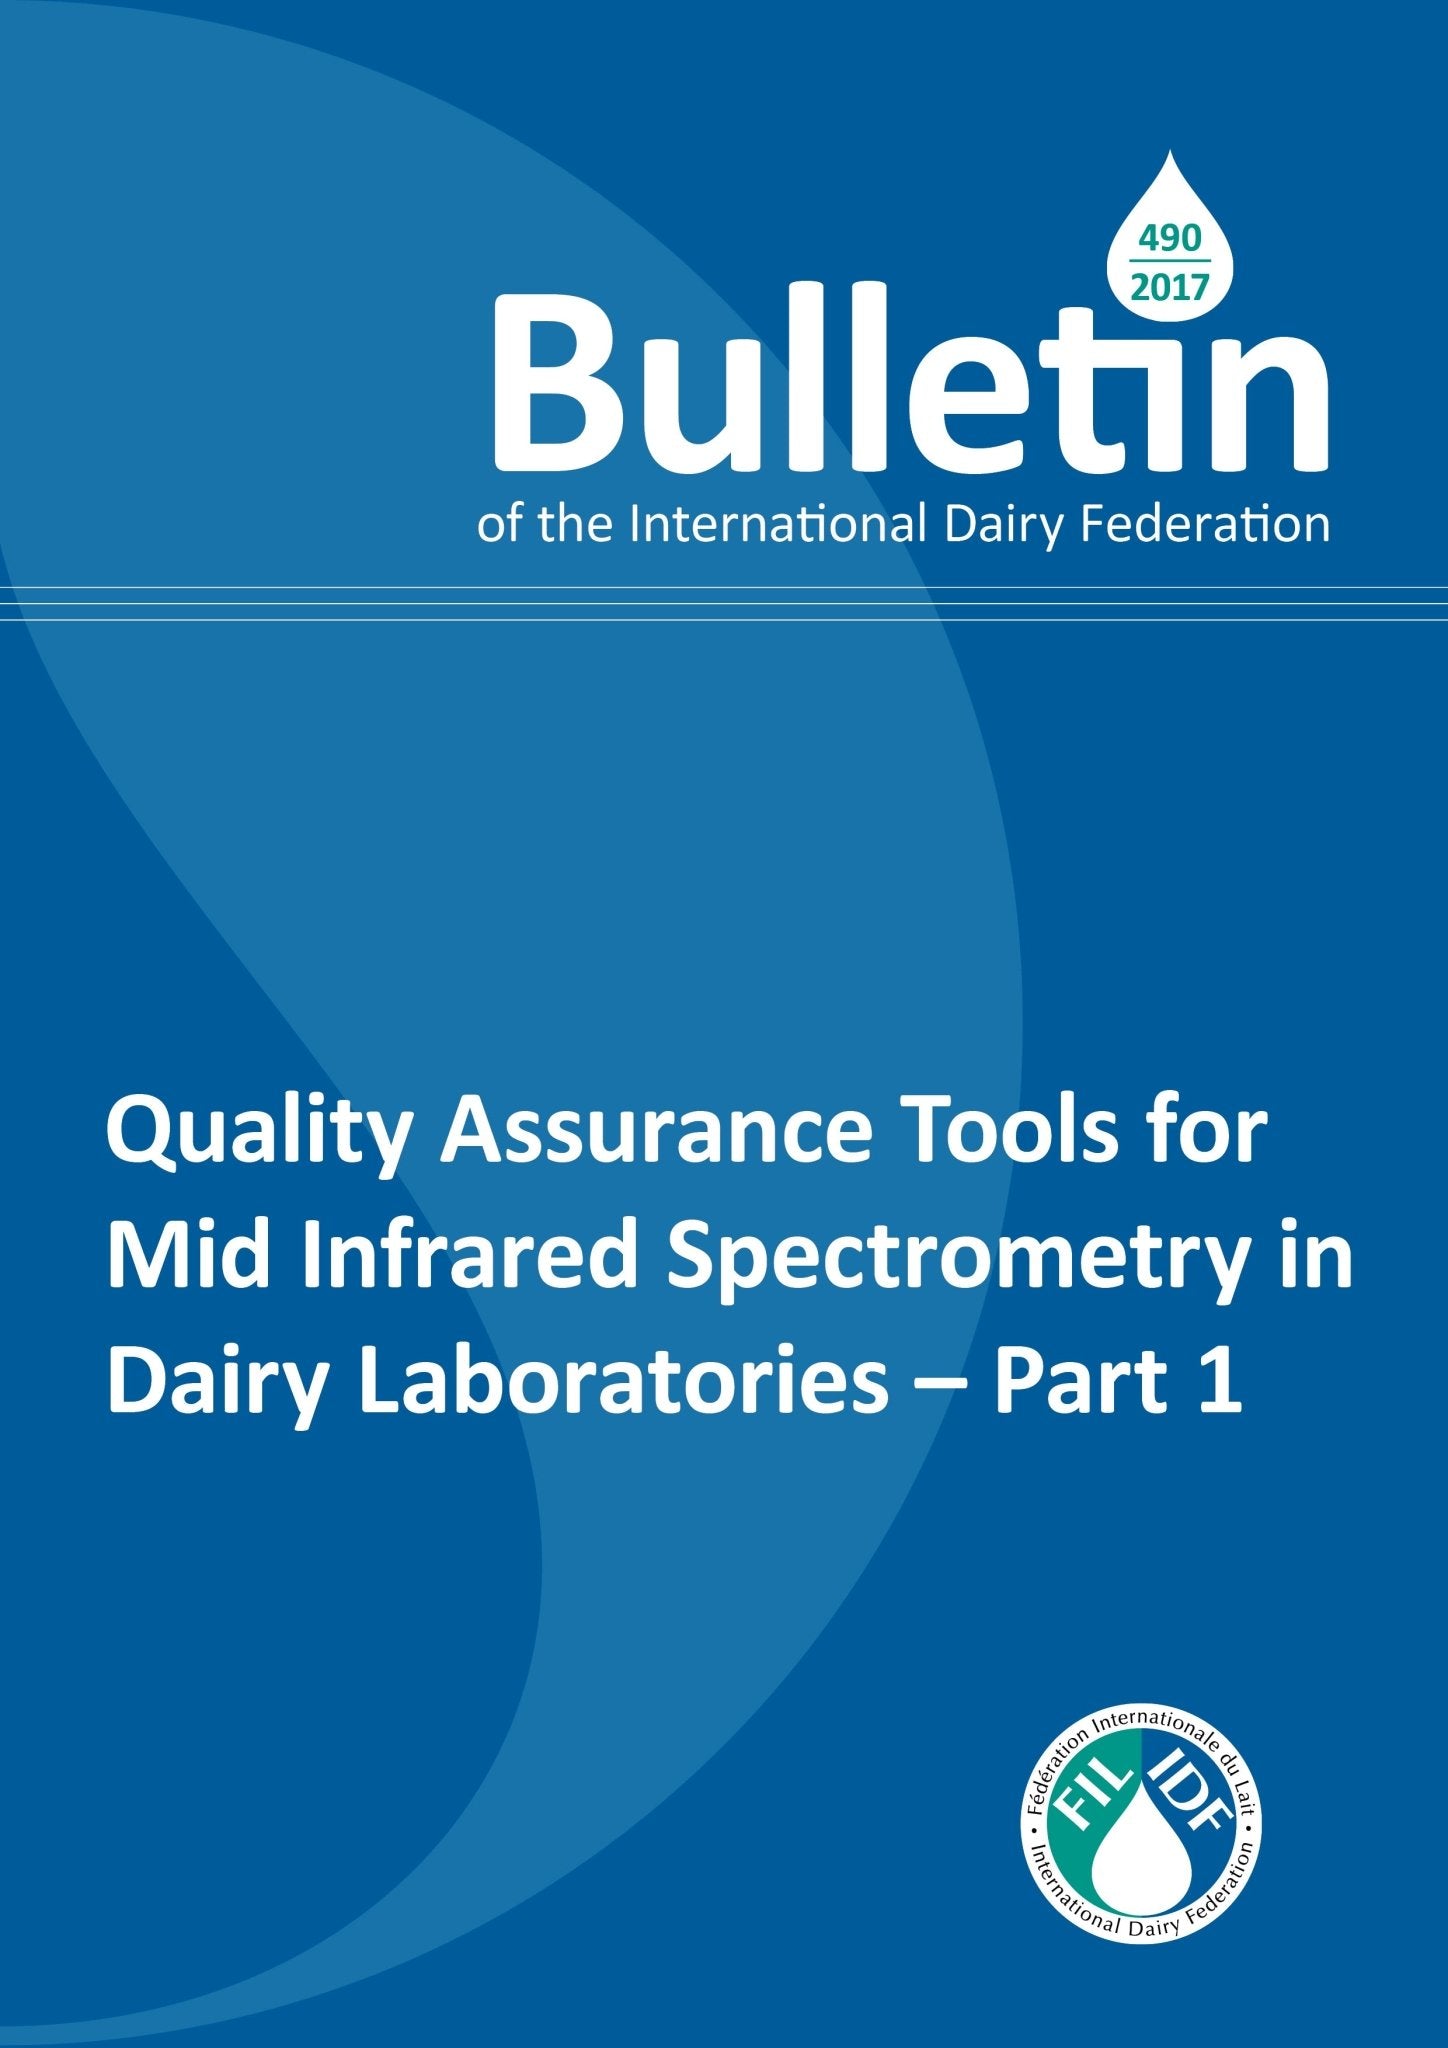 Bulletin of the IDF N° 490/2017: Quality Assurance Tools for Mid Infrared Spectrometry in Dairy Laboratories - Part 1 - FIL-IDF